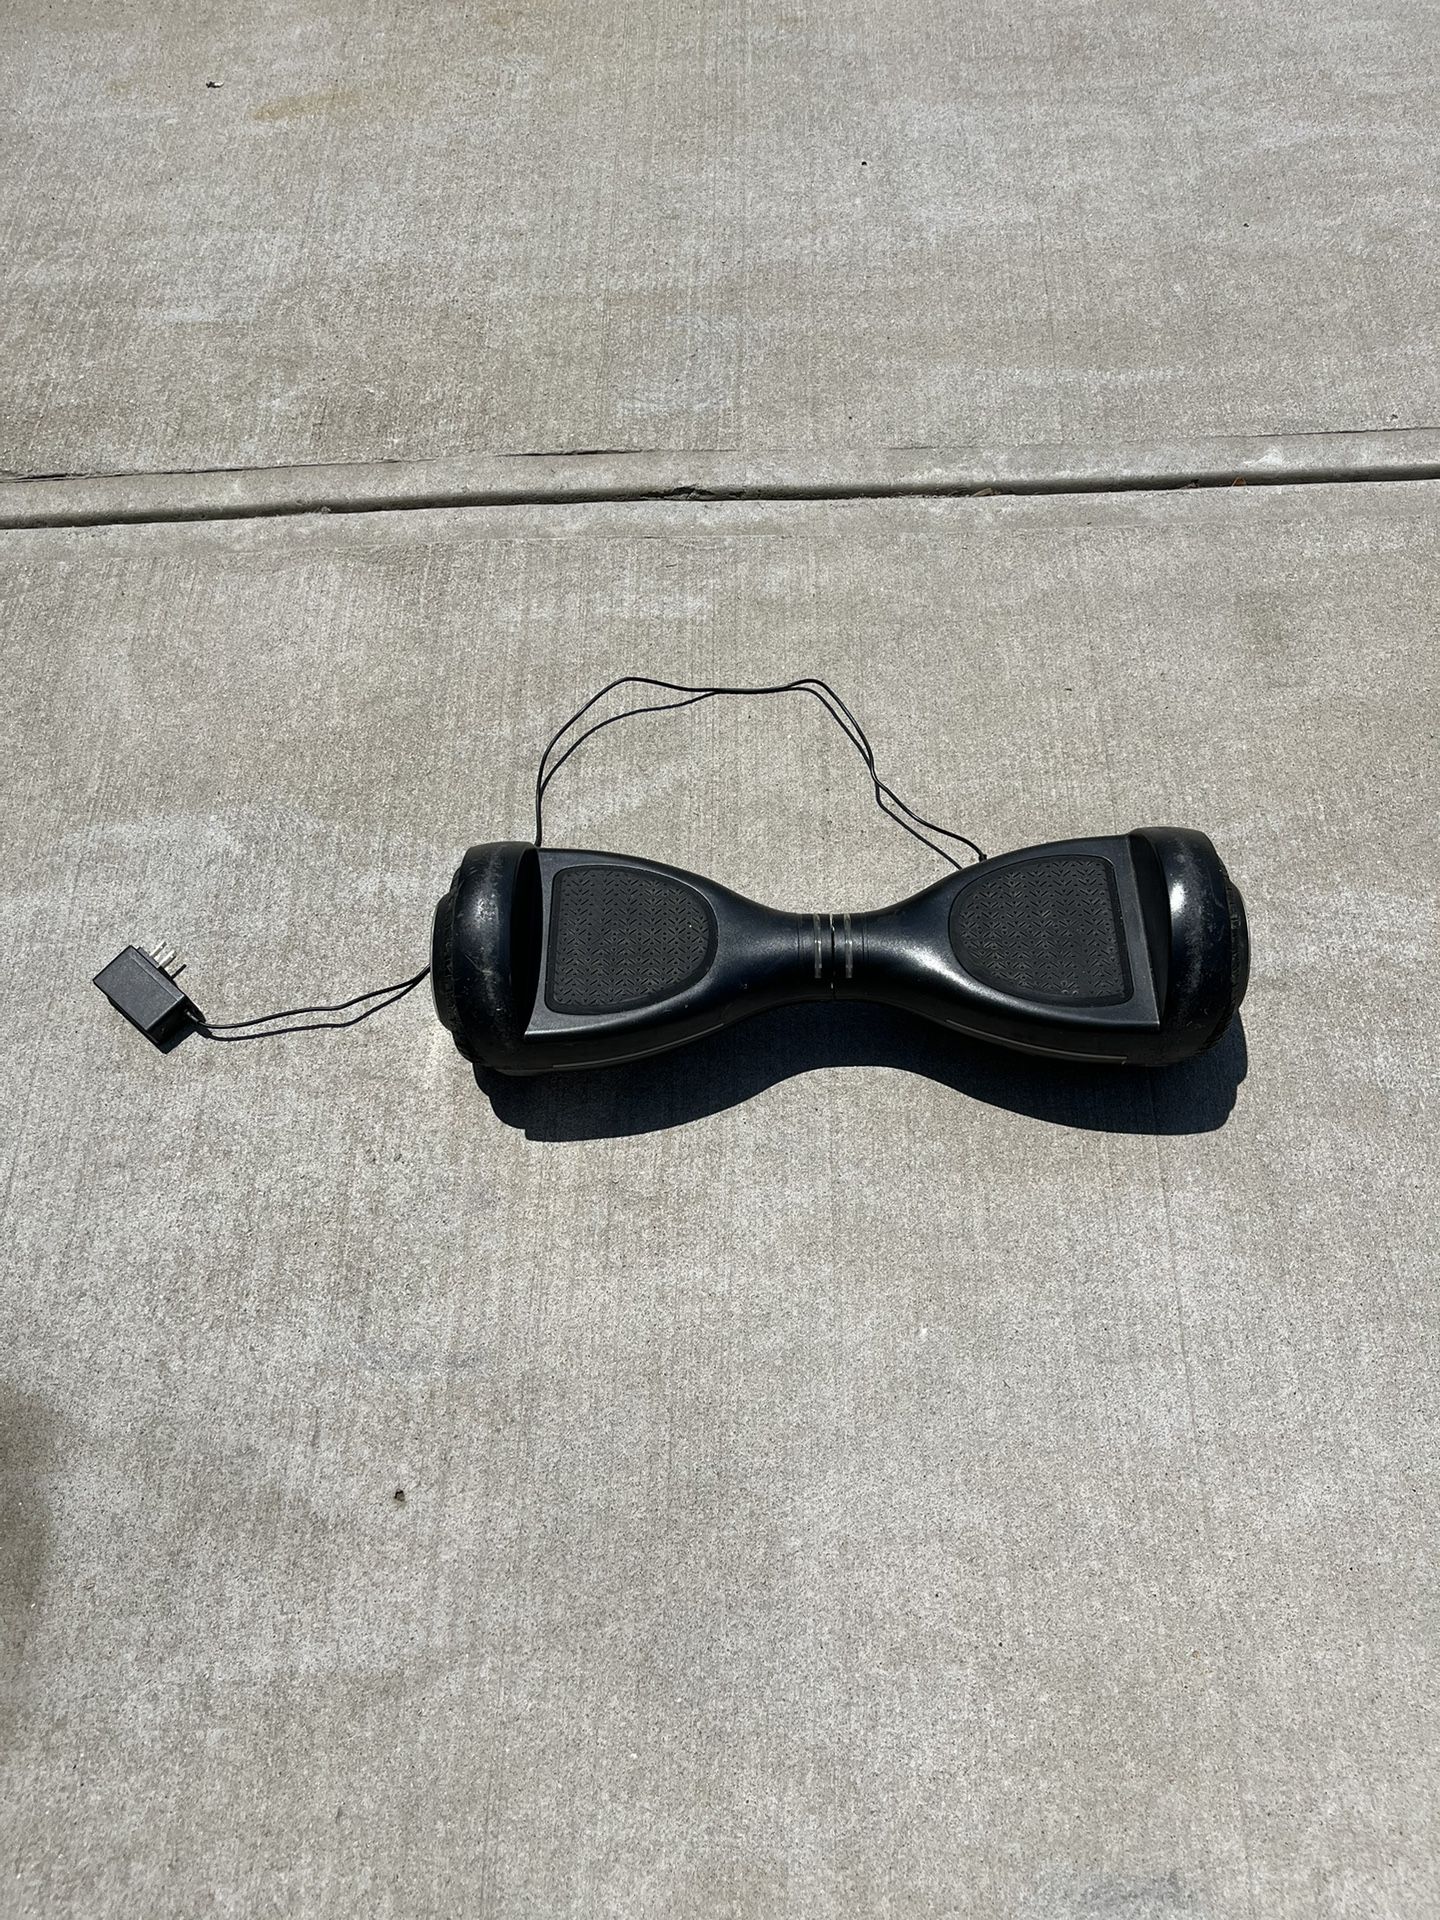 Hover Board With Charger